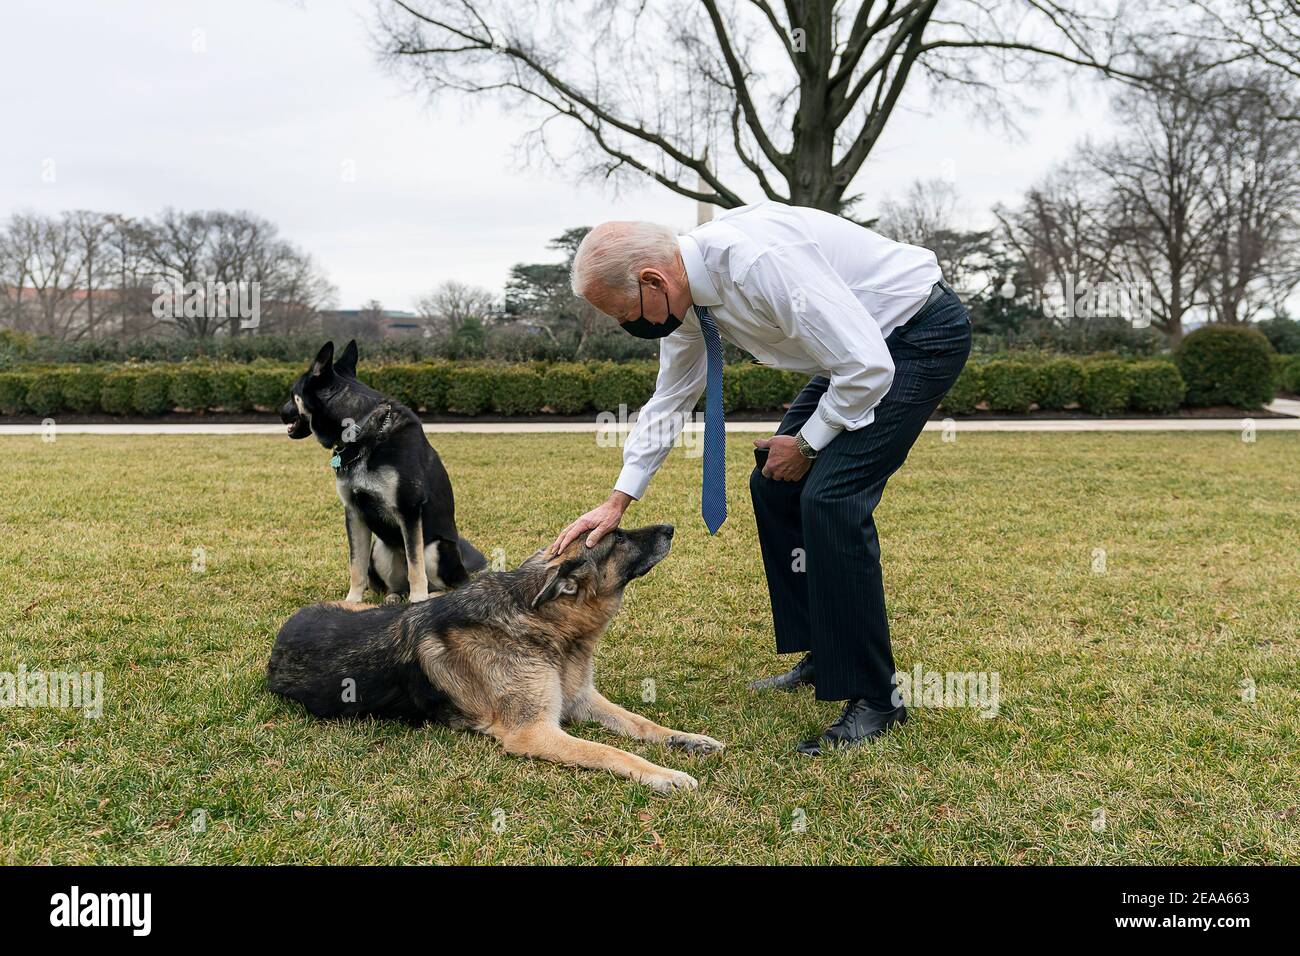 President Joe Biden greets the Biden’s dogs Champ and Major Monday, Jan. 25, 2021, in the Rose Garden of the White House. (Official White House Photo by Adam Schultz) Stock Photo